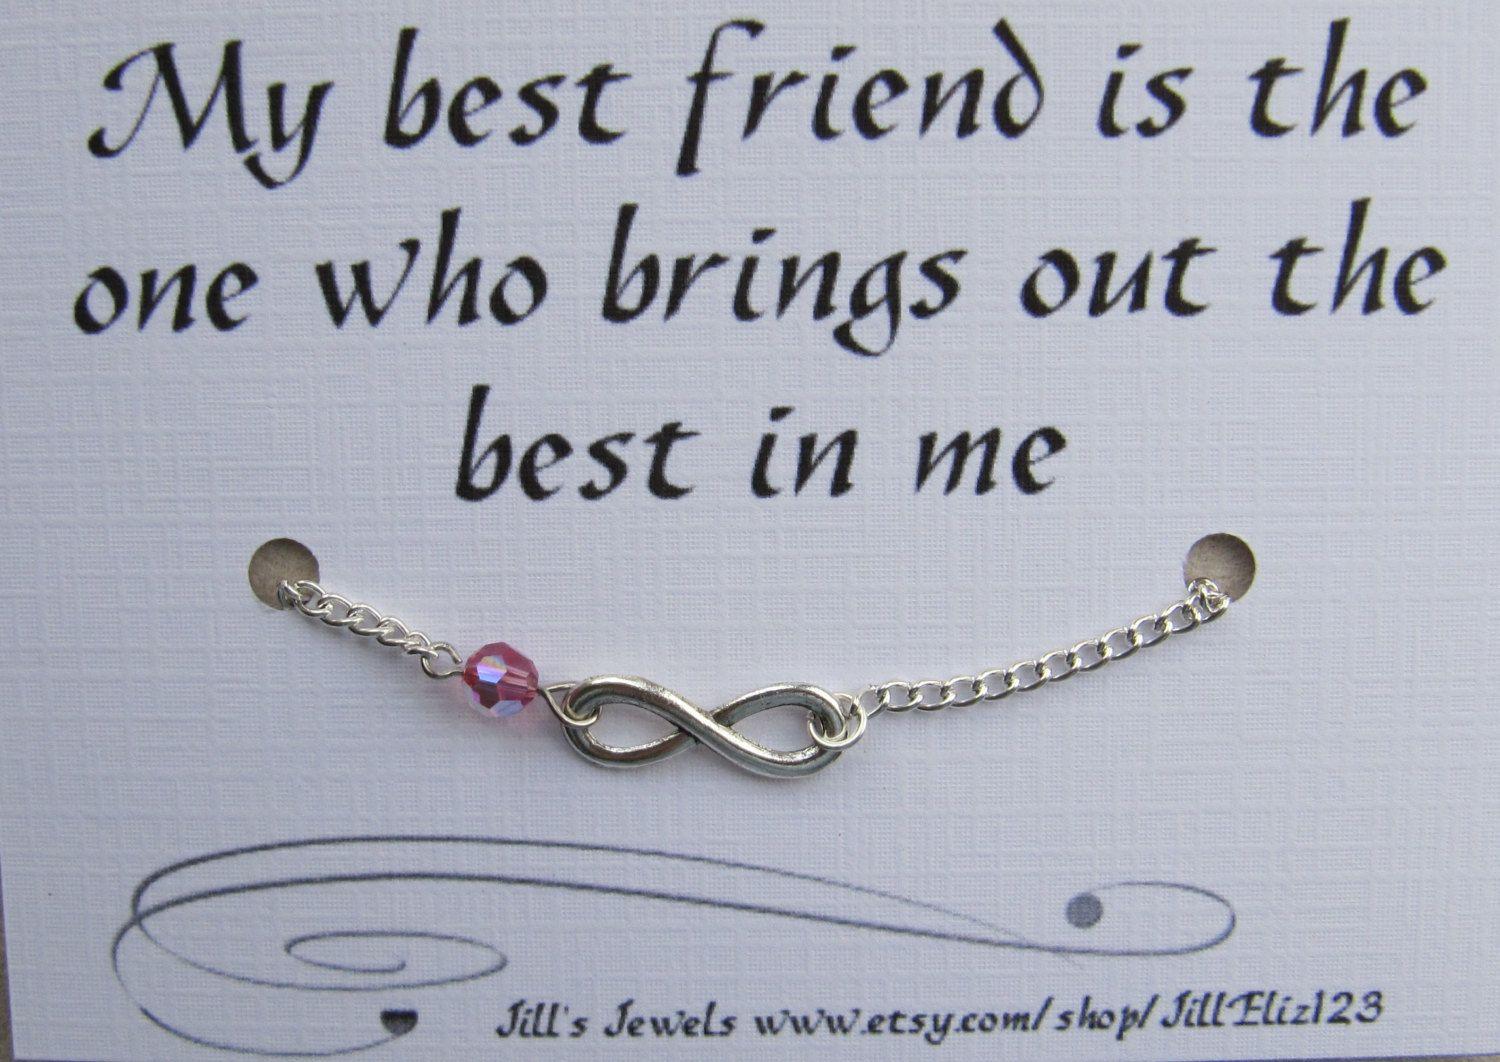 Best Quote About Friendship. QUOTES OF THE DAY